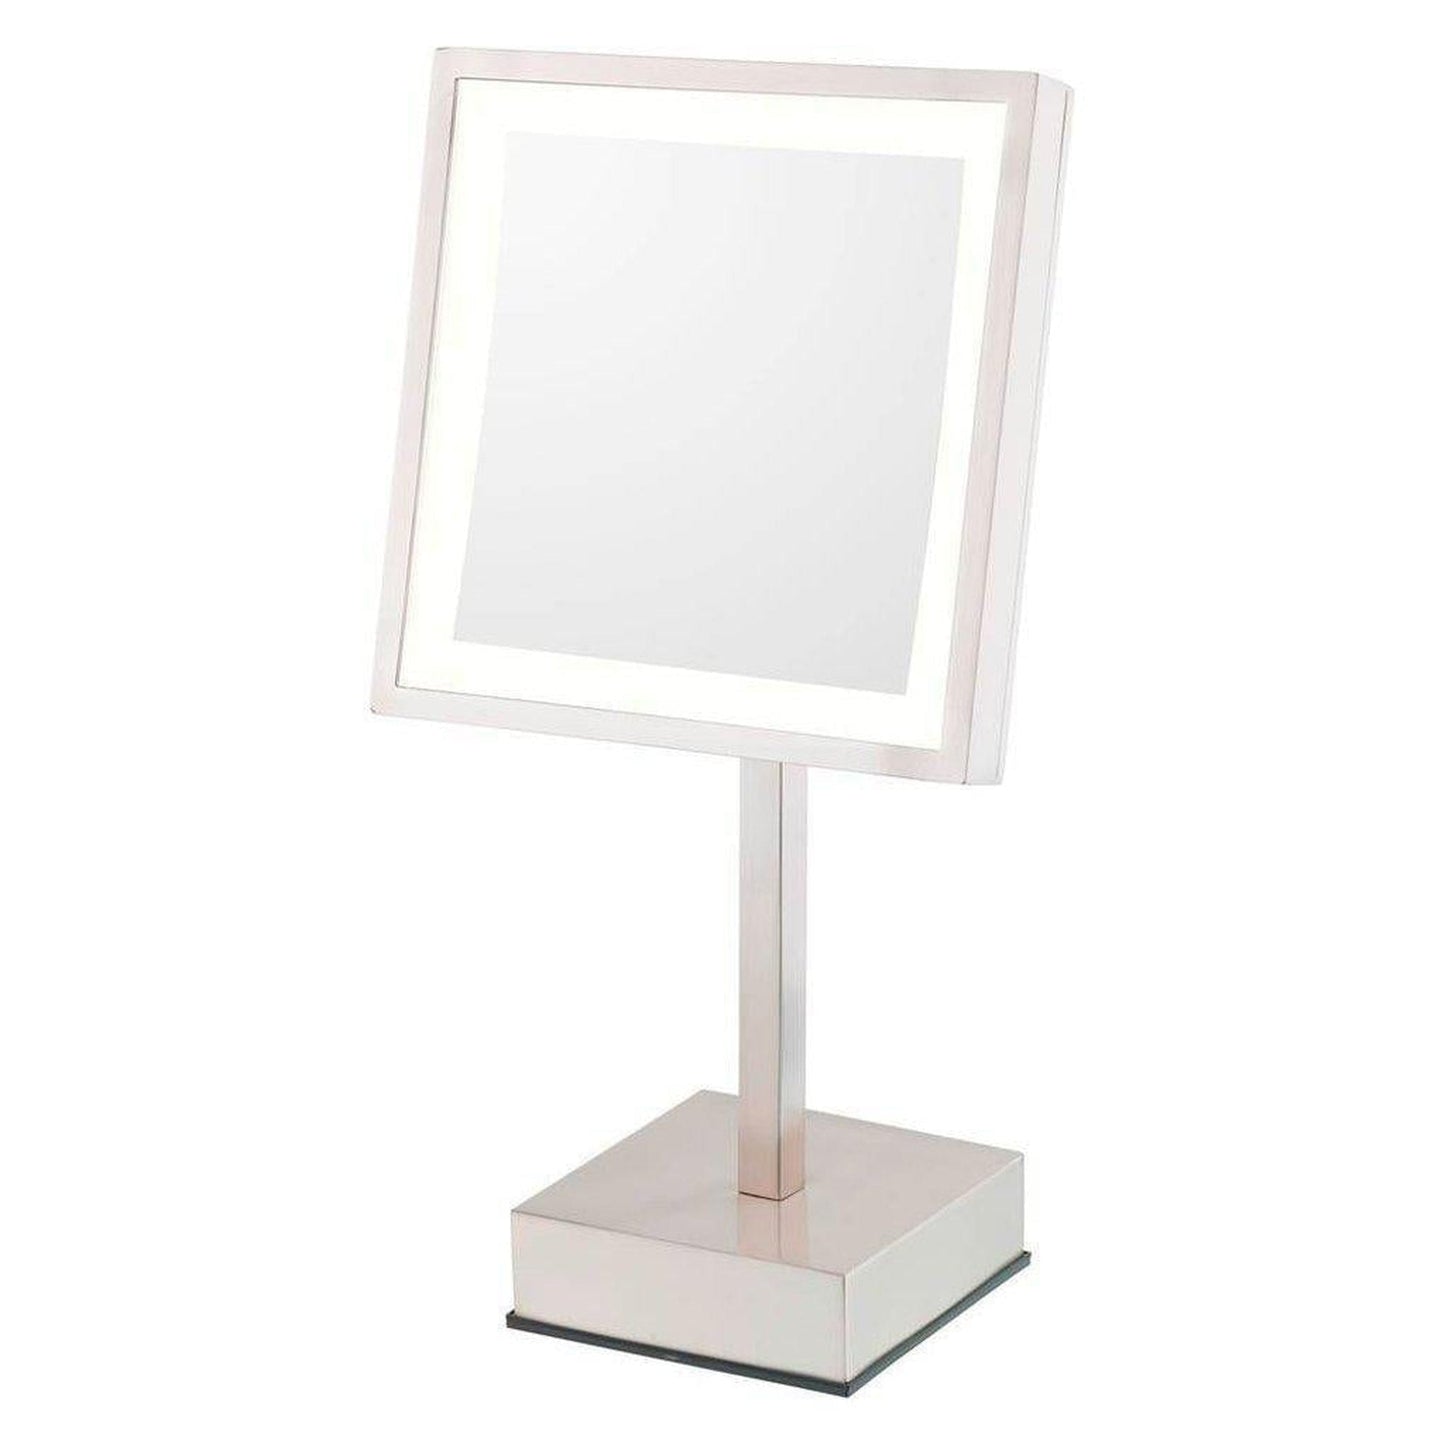 Aptations Kimball & Young 8" x 15" Brushed Nickel Freestanding Square Rechargeable Single Sided 3X Magnified Mirror With 5,500K Cool White LED Light Color